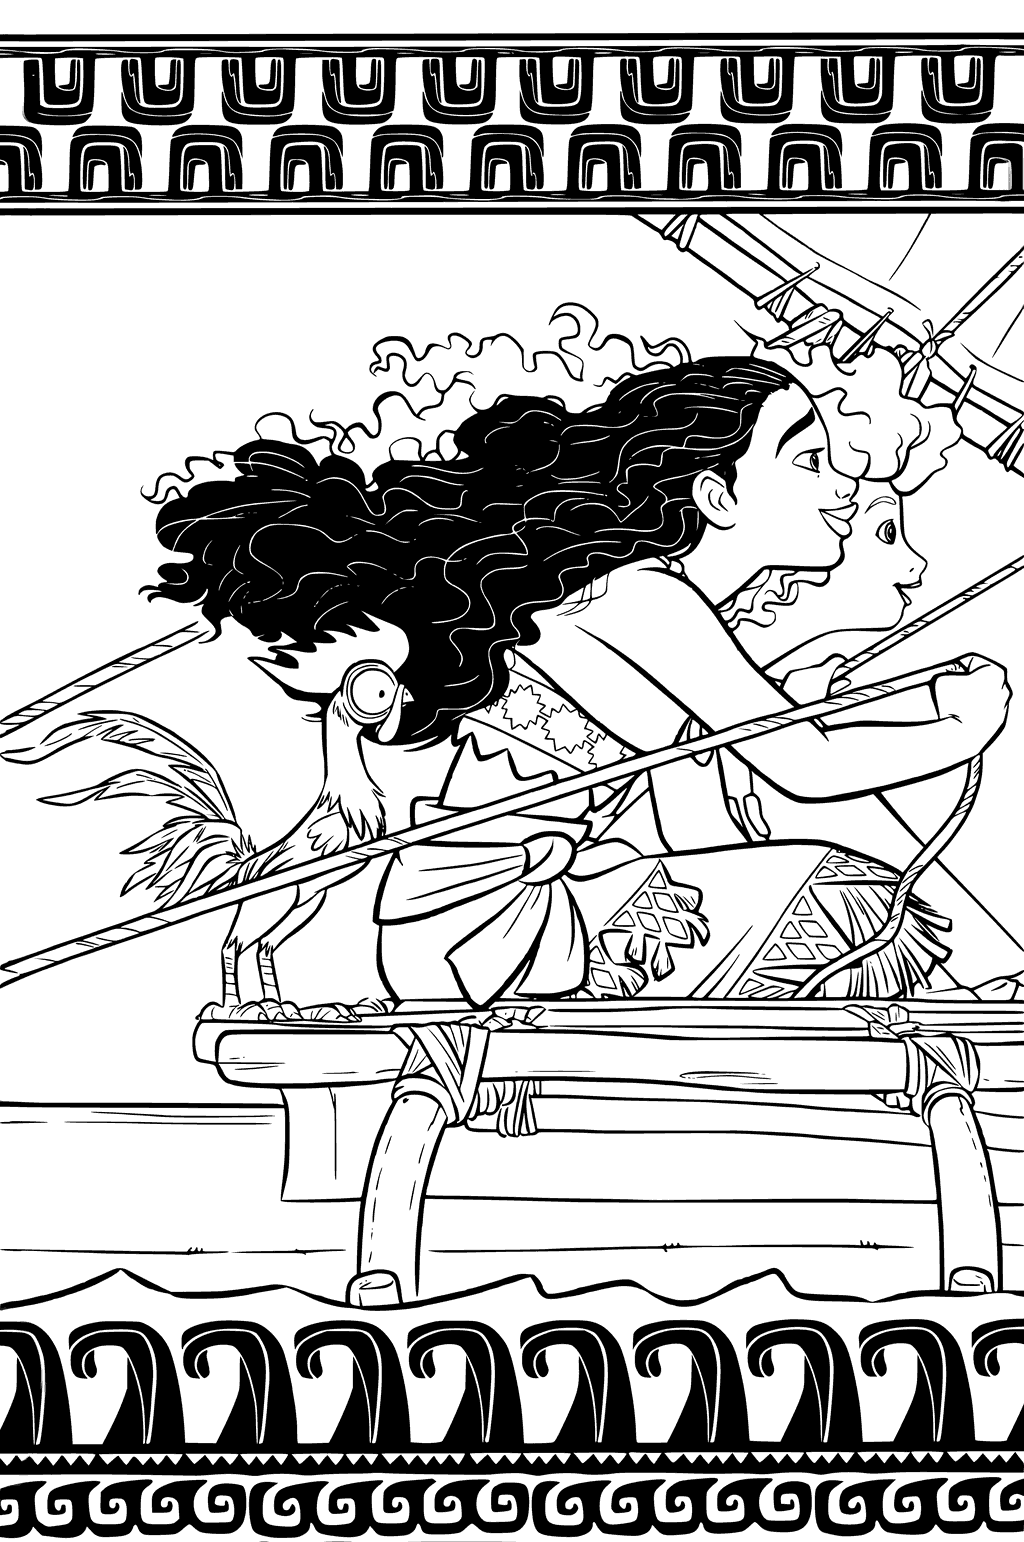 Disney Sailing Coloring Pages